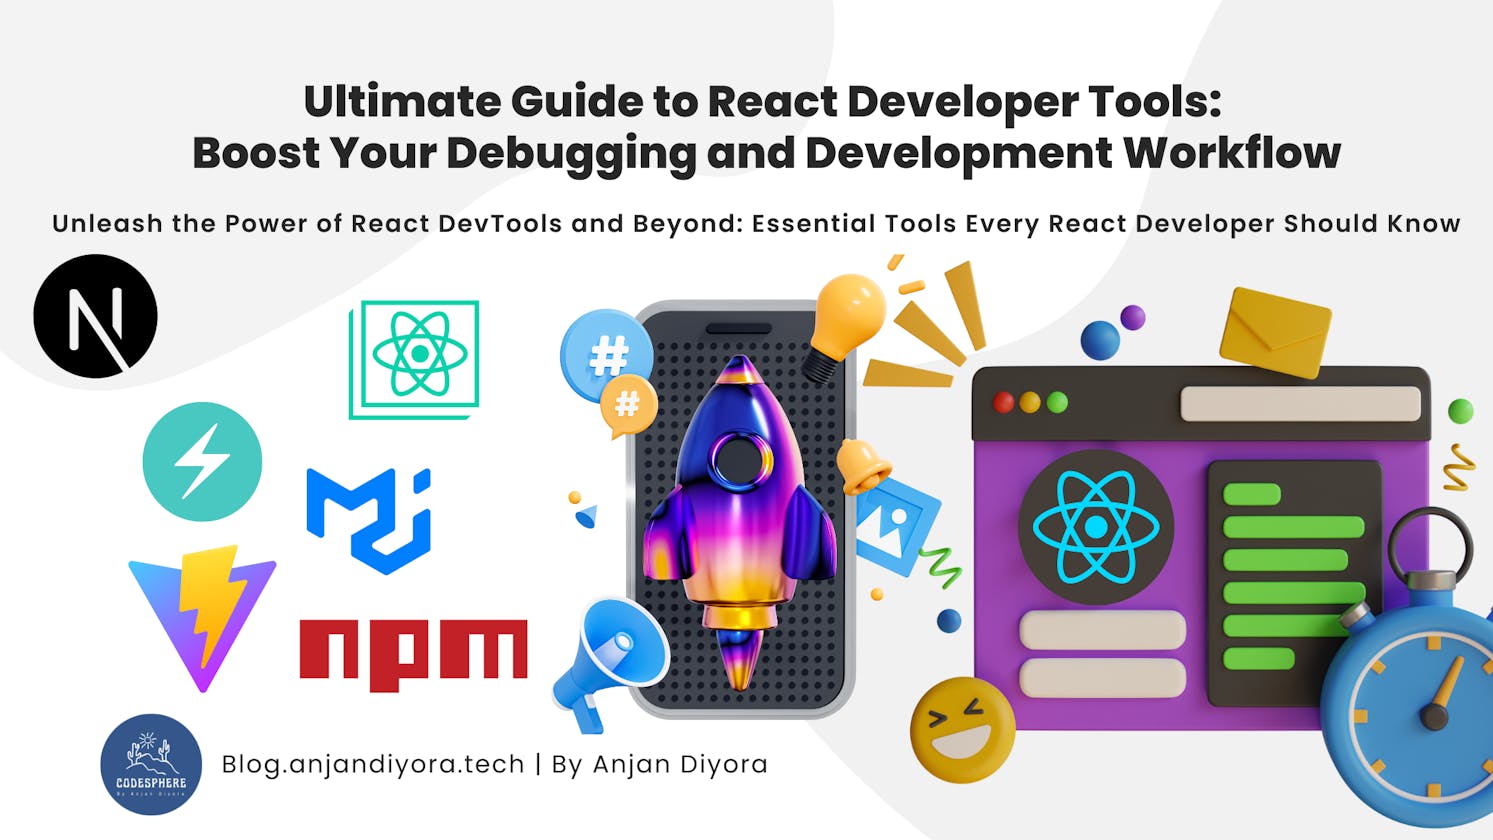 Ultimate Guide to React Developer Tools: Boost Your Debugging and Development Workflow